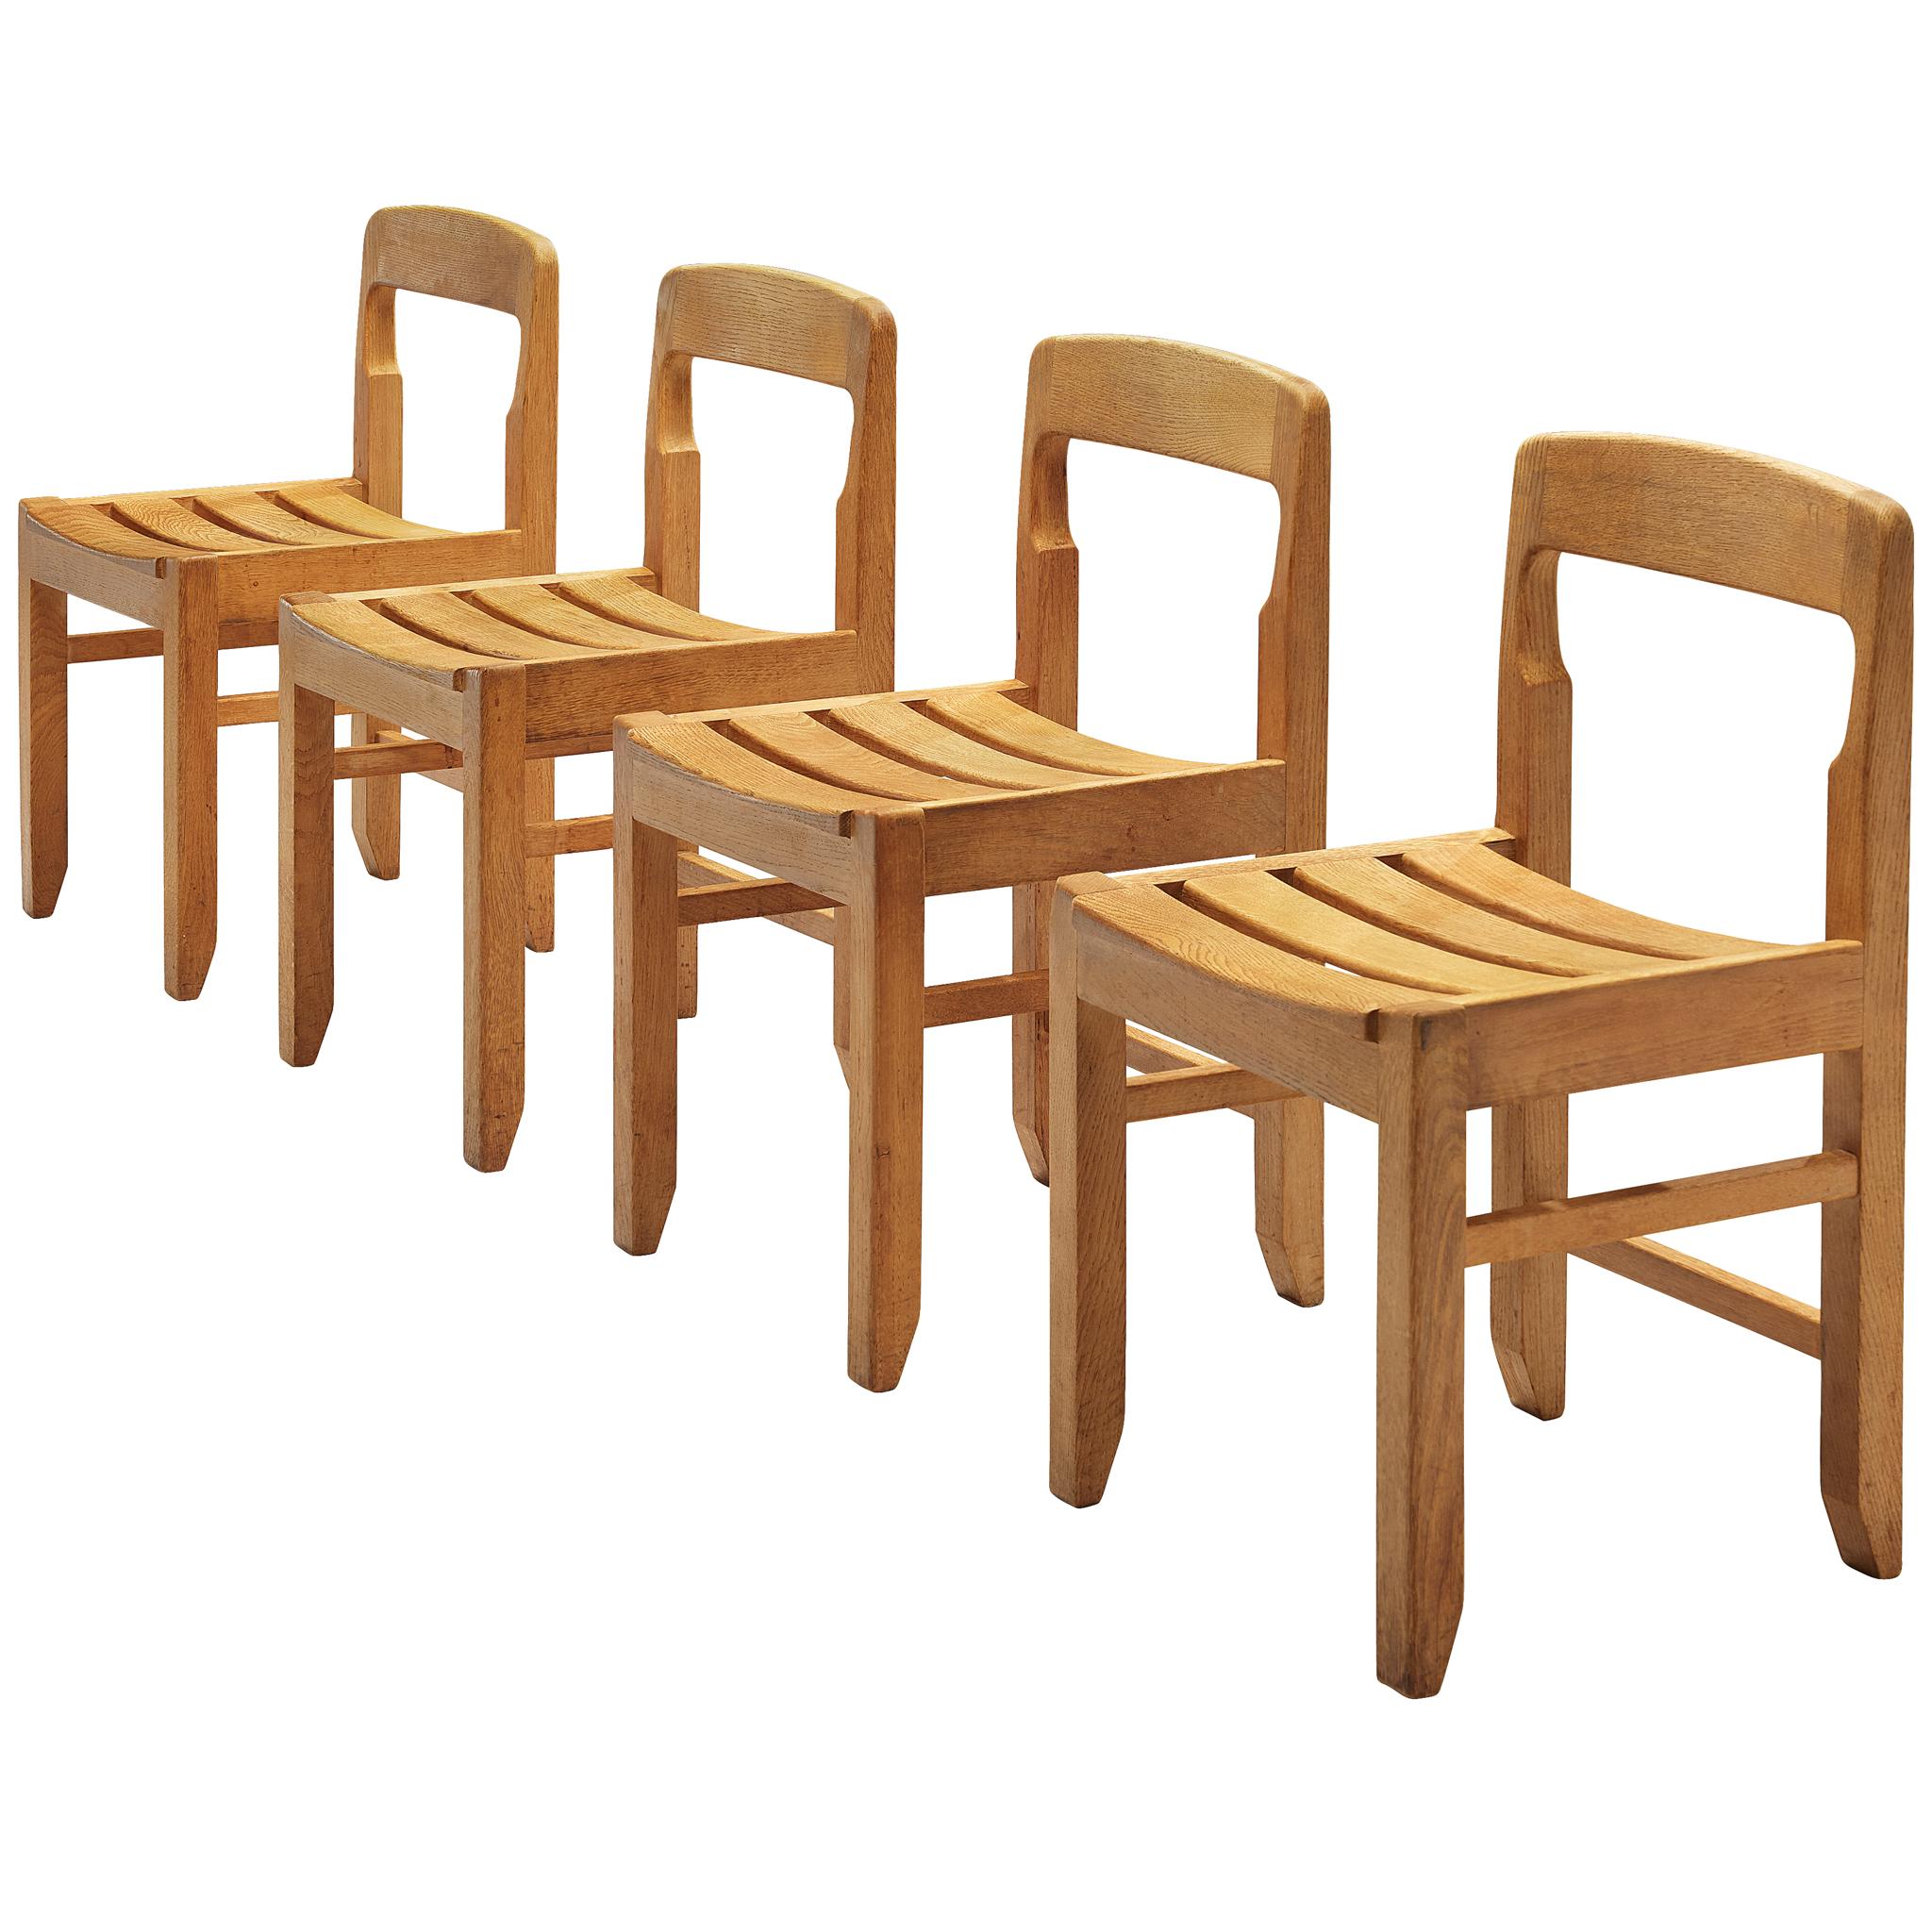 Guillerme et Chambron, set of four dining chairs, solid oak, France, 1960s.

Set of four exceptional and rare dining chairs in solid oak by Guillerme and Chambron. These chairs show the characteristic frame of this French designer duo. They feature